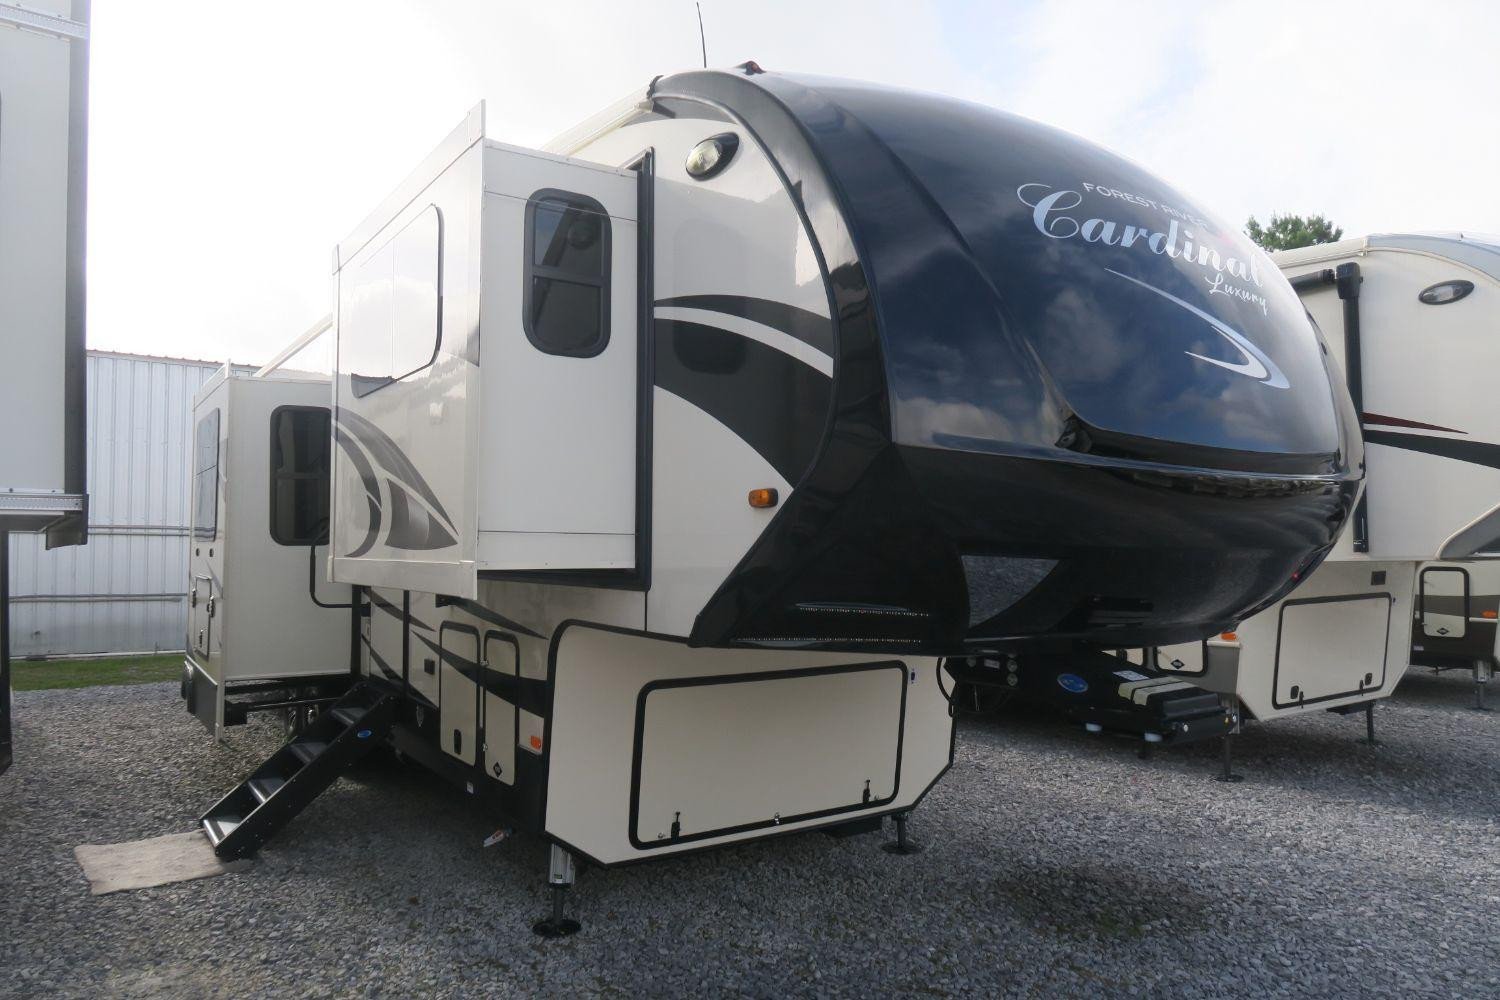 NEW 2020 CARDINAL LUXURY 3700FLX - Overview | Berryland Campers 2020 Forest River Cardinal Luxury Fifth Wheel 3700flx